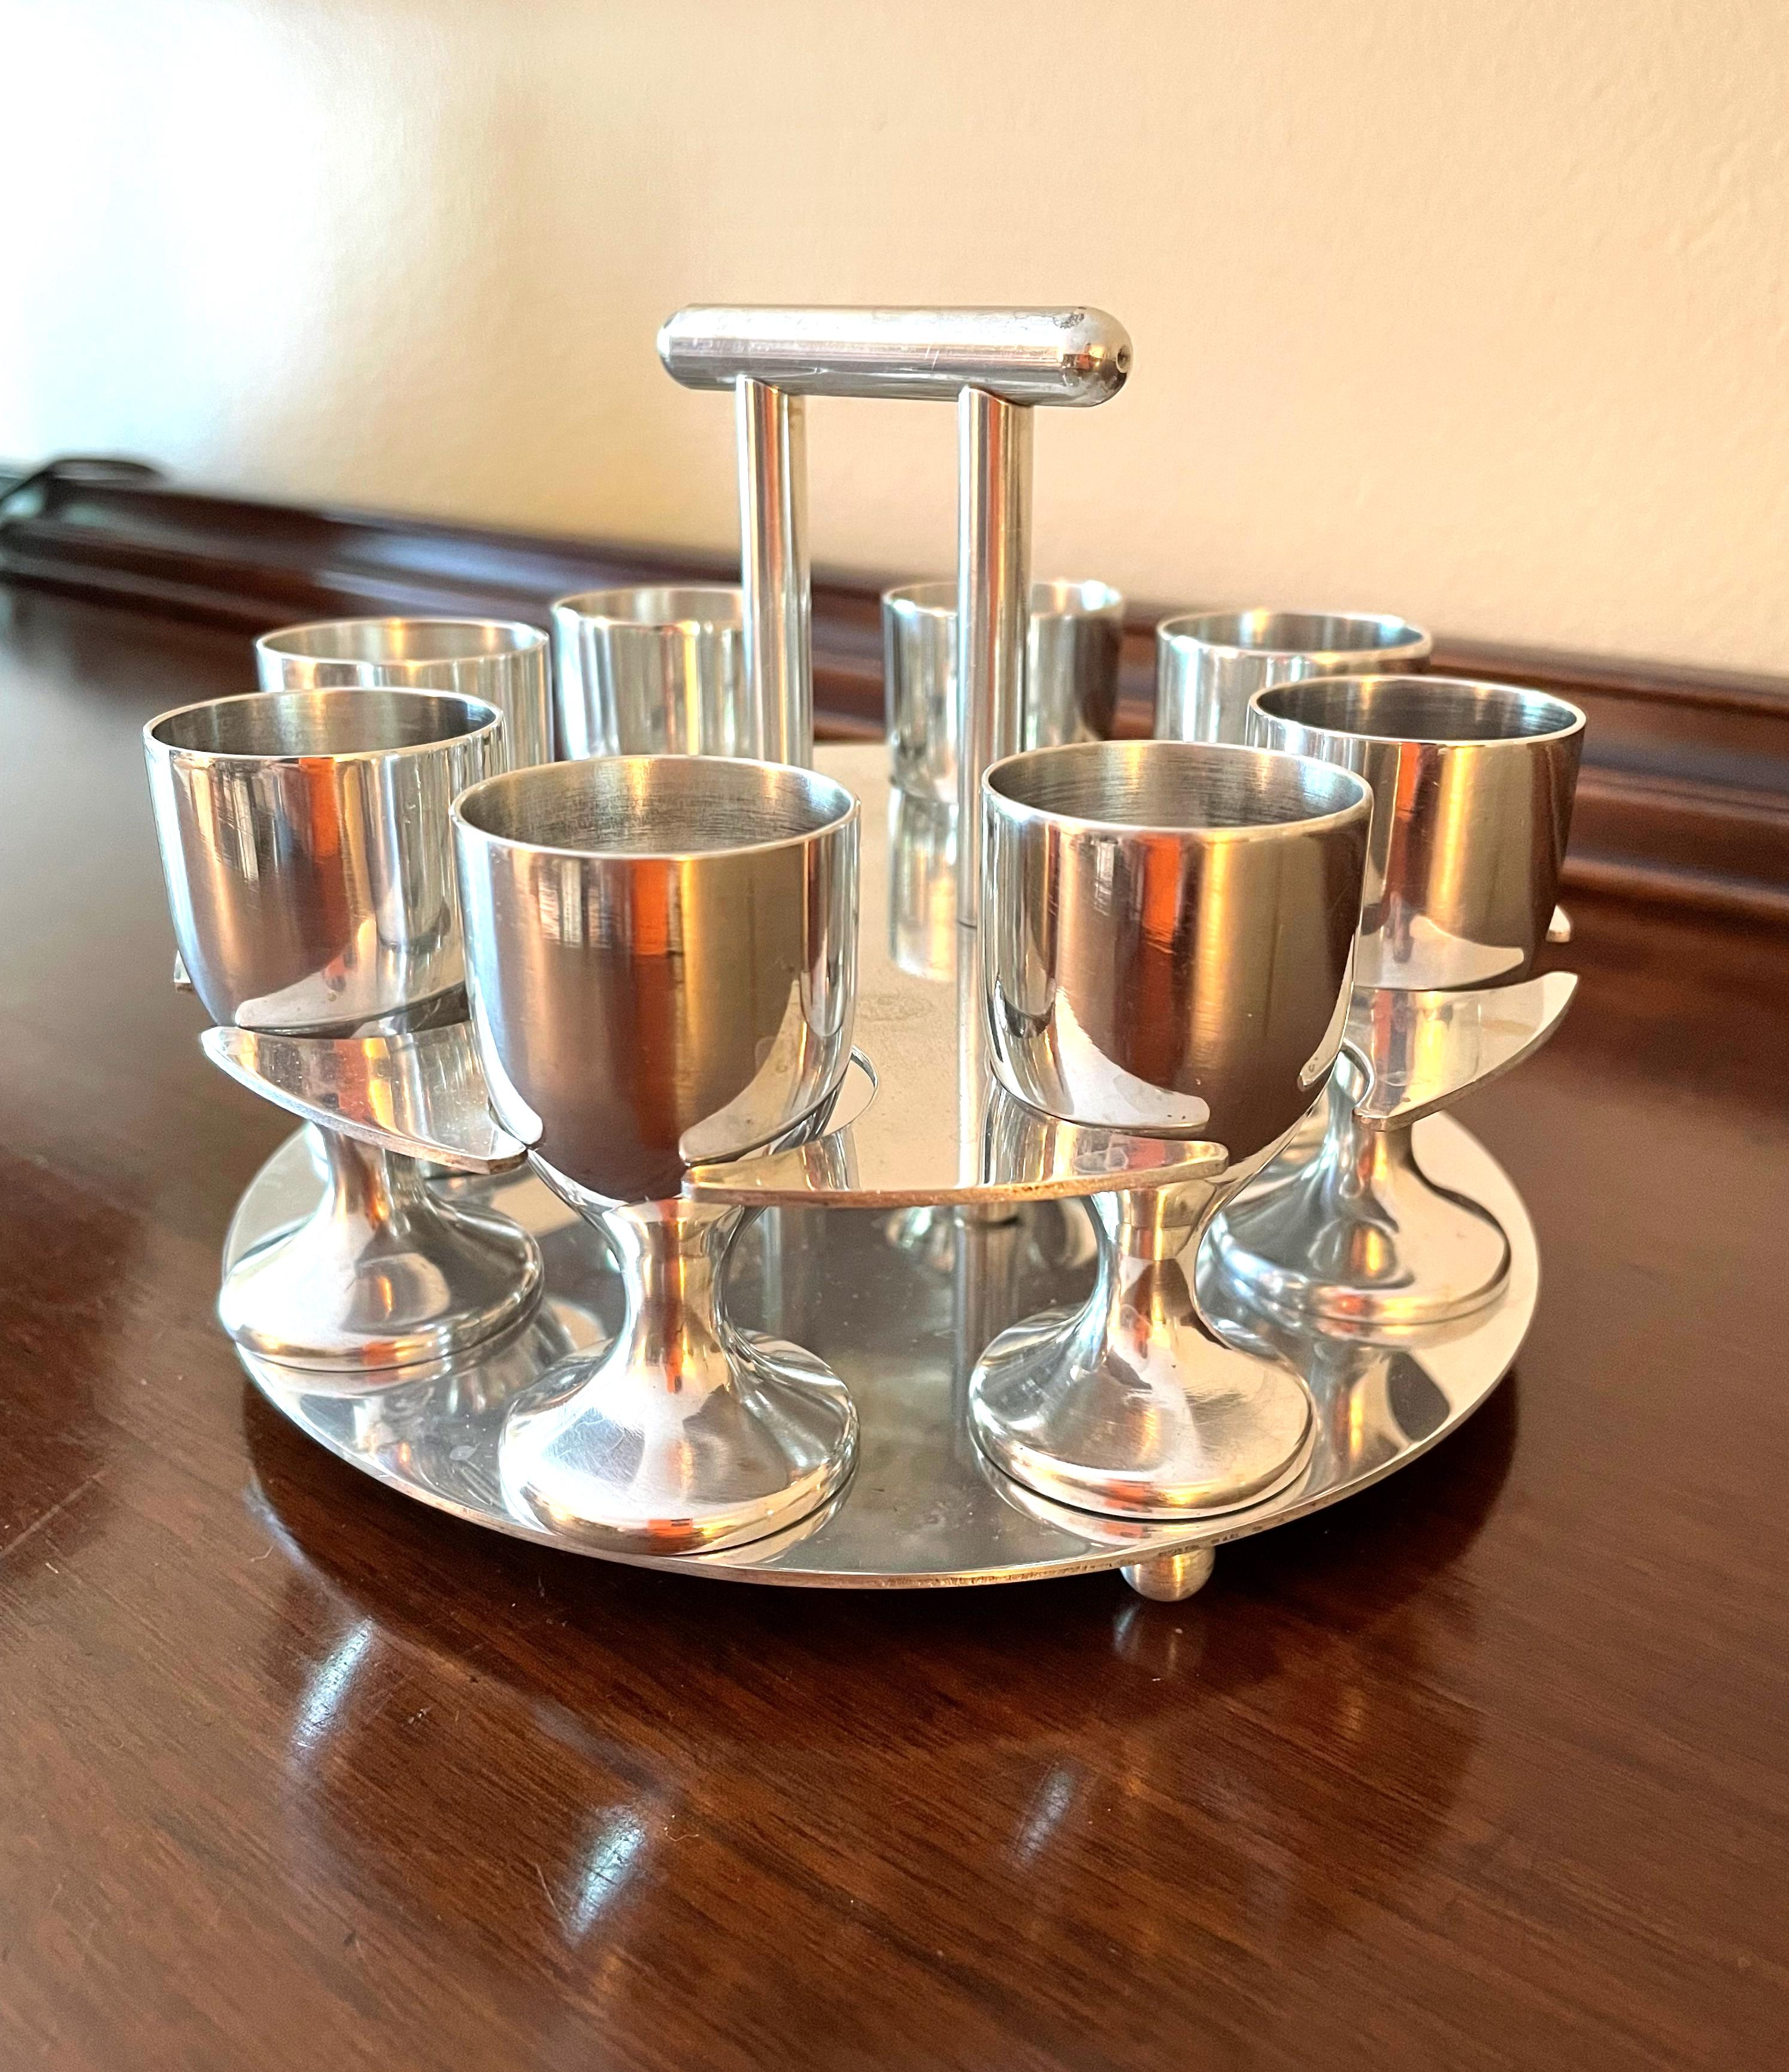 Mid-20th Century Stainless Steel Aperitifs / Cordials or Shot Glasses, Set of 8 For Sale